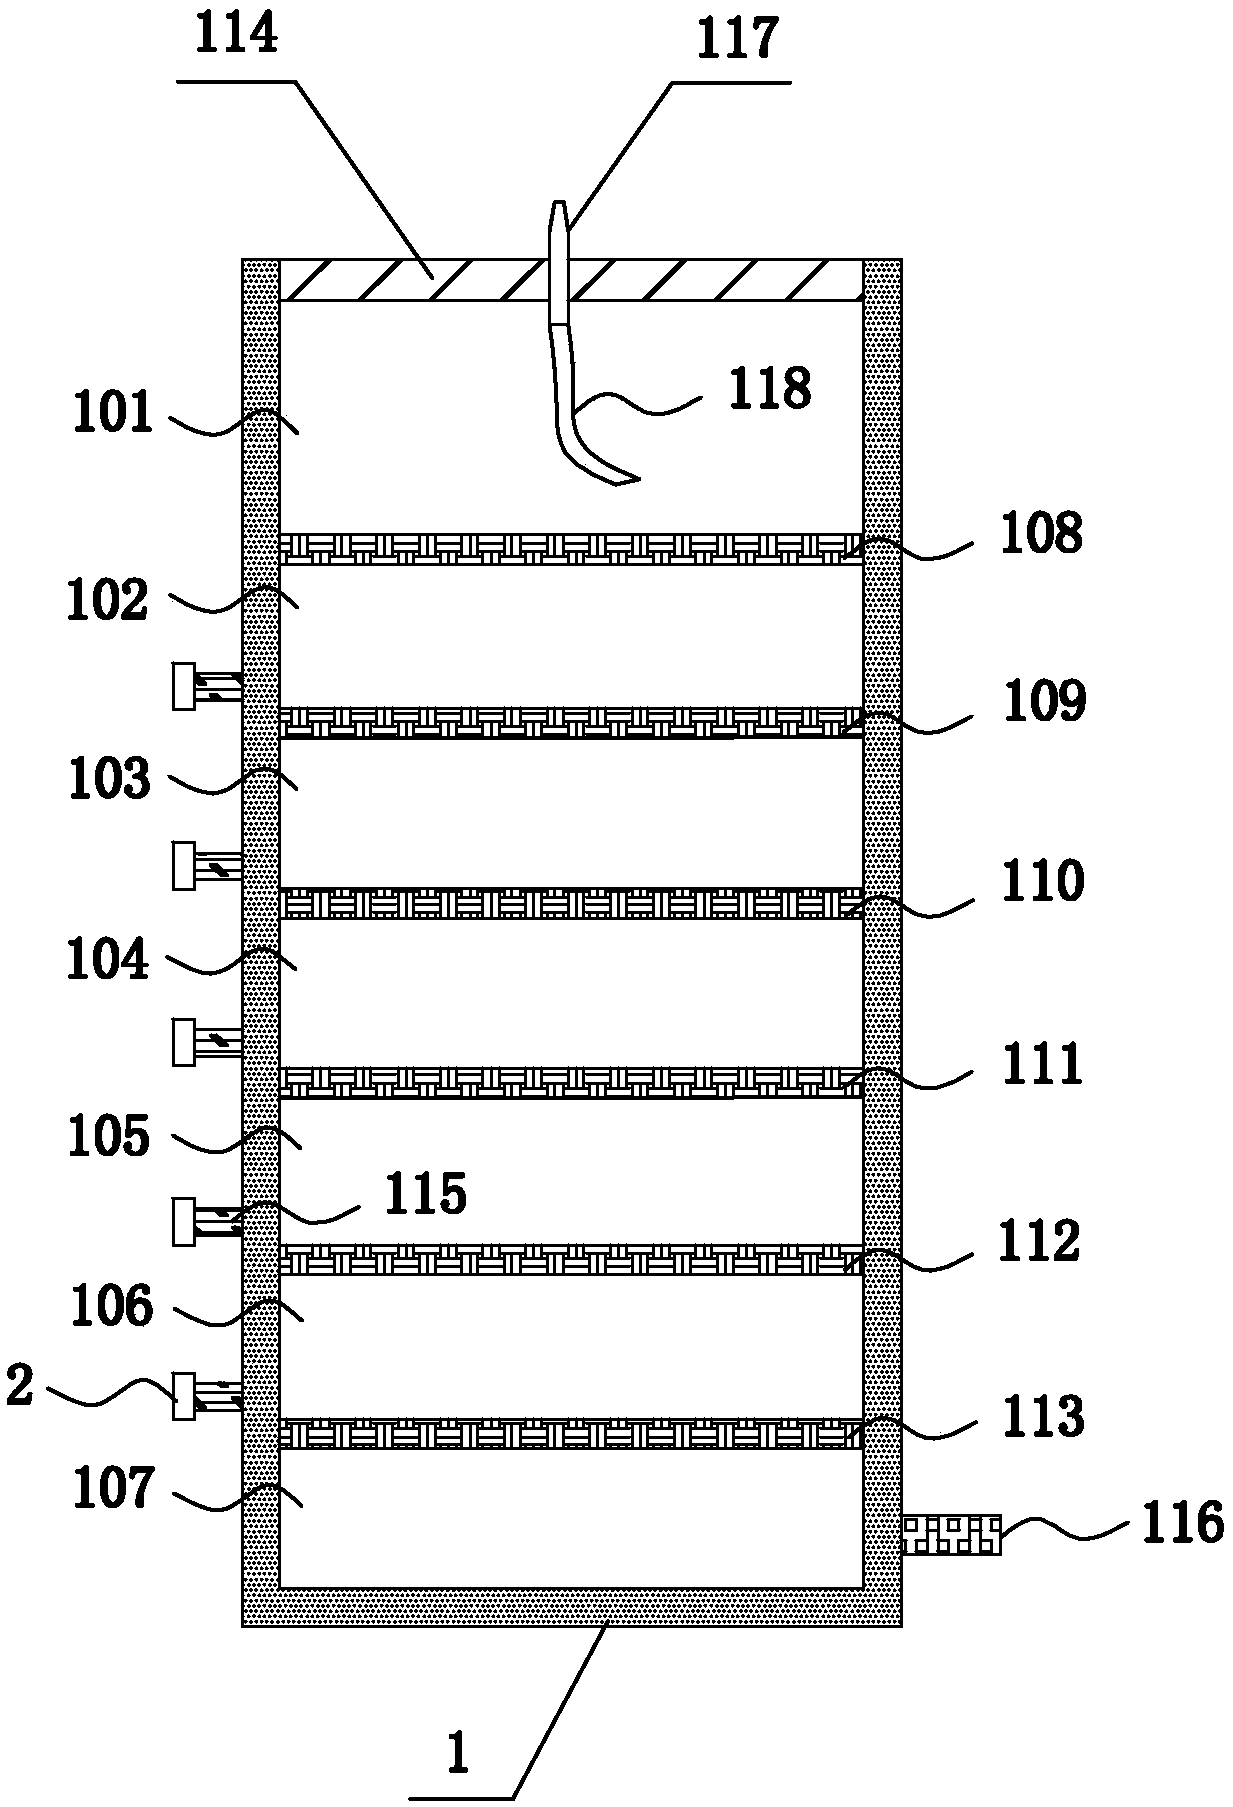 Point-to-point directional adipose transplantation device